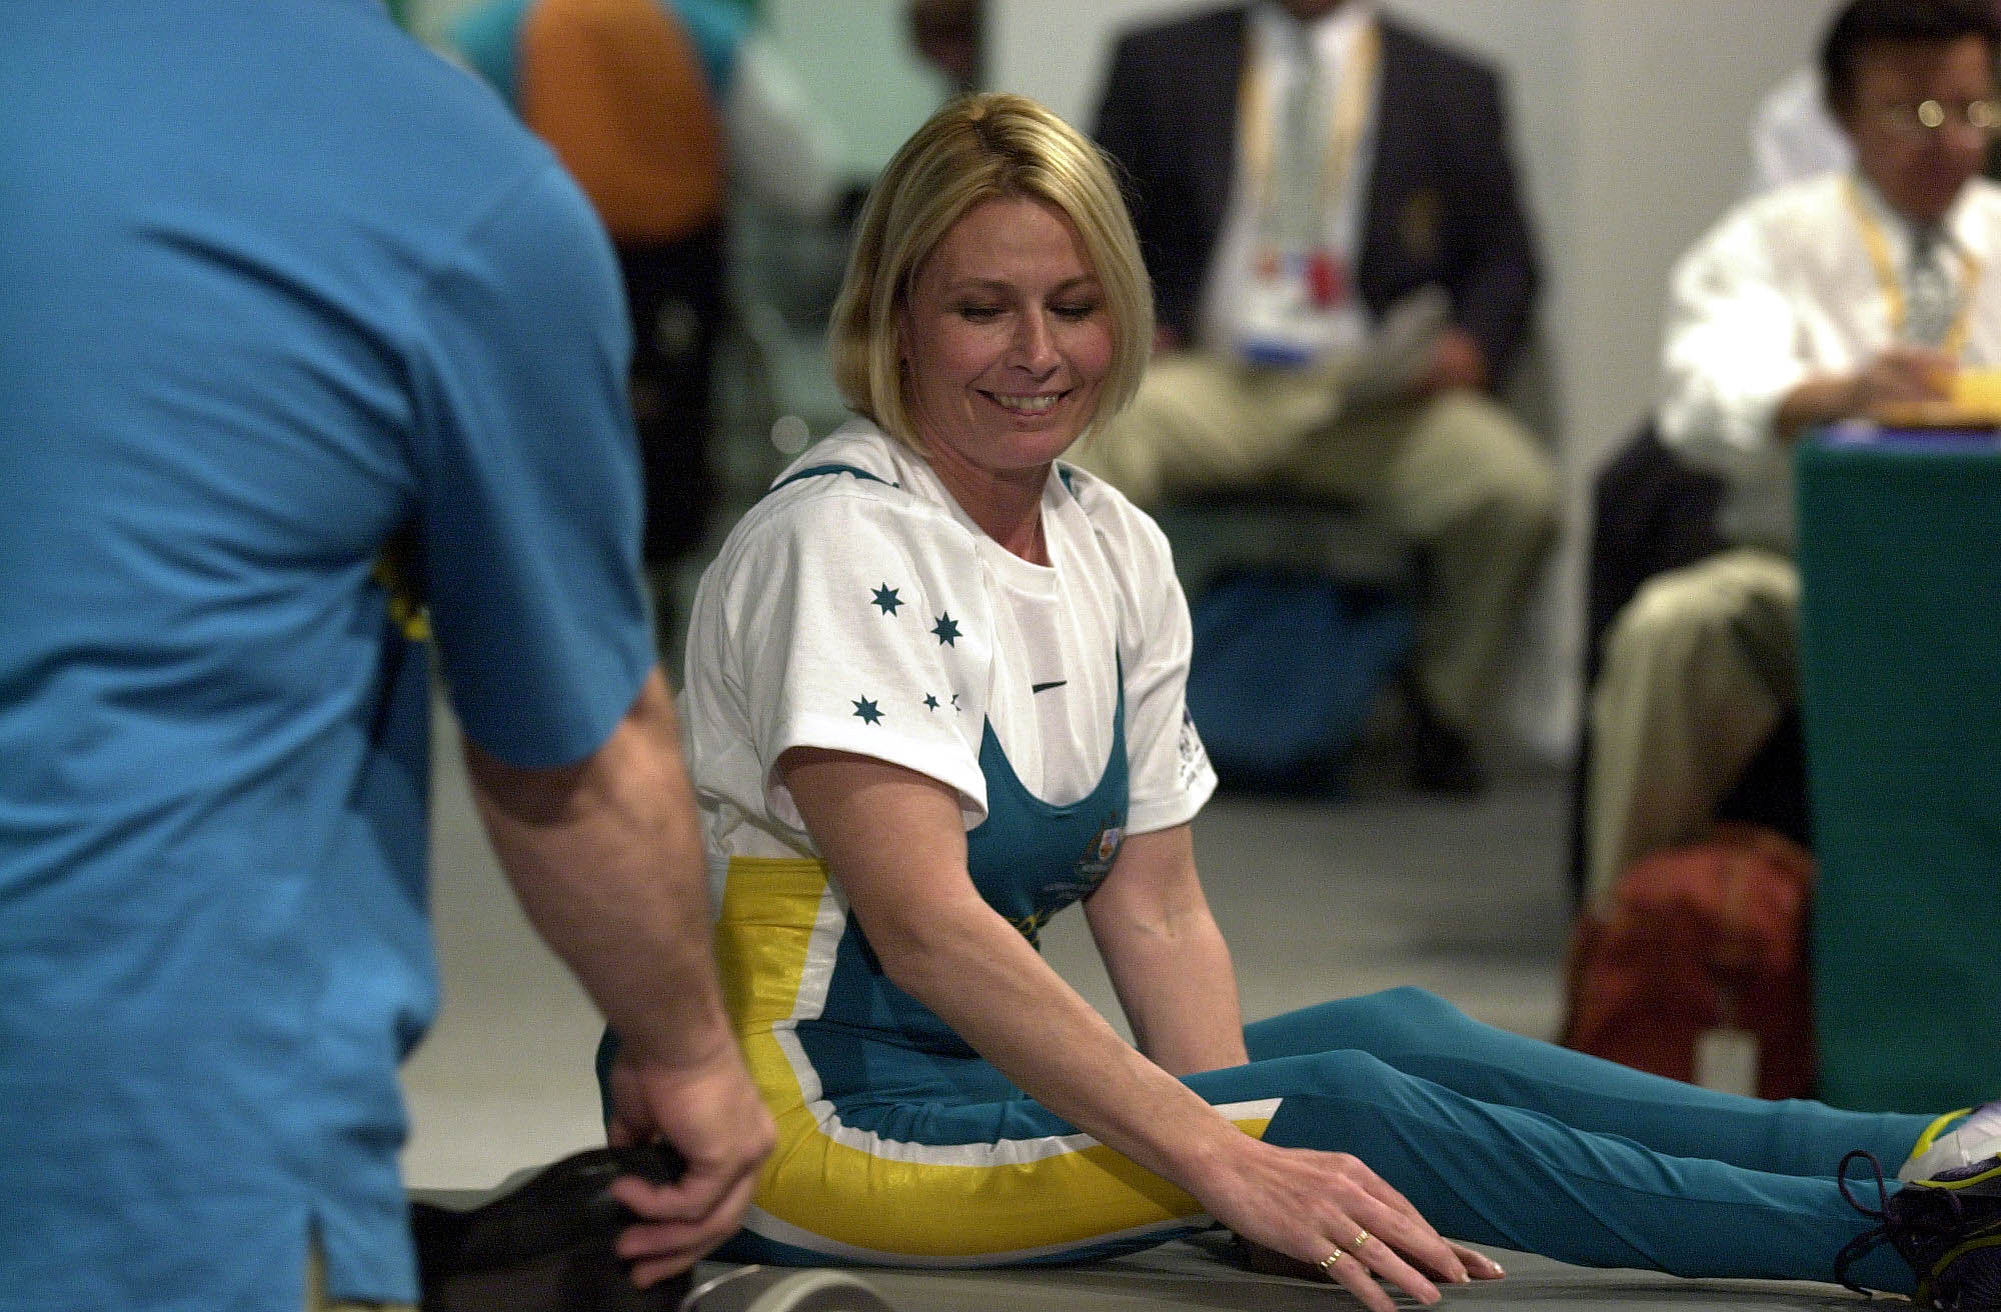 Suzanne Twelftree preparing for the Paralympic powerlifting competition. Photo: Australian Paralympic Committee, CC BY-SA 3.0